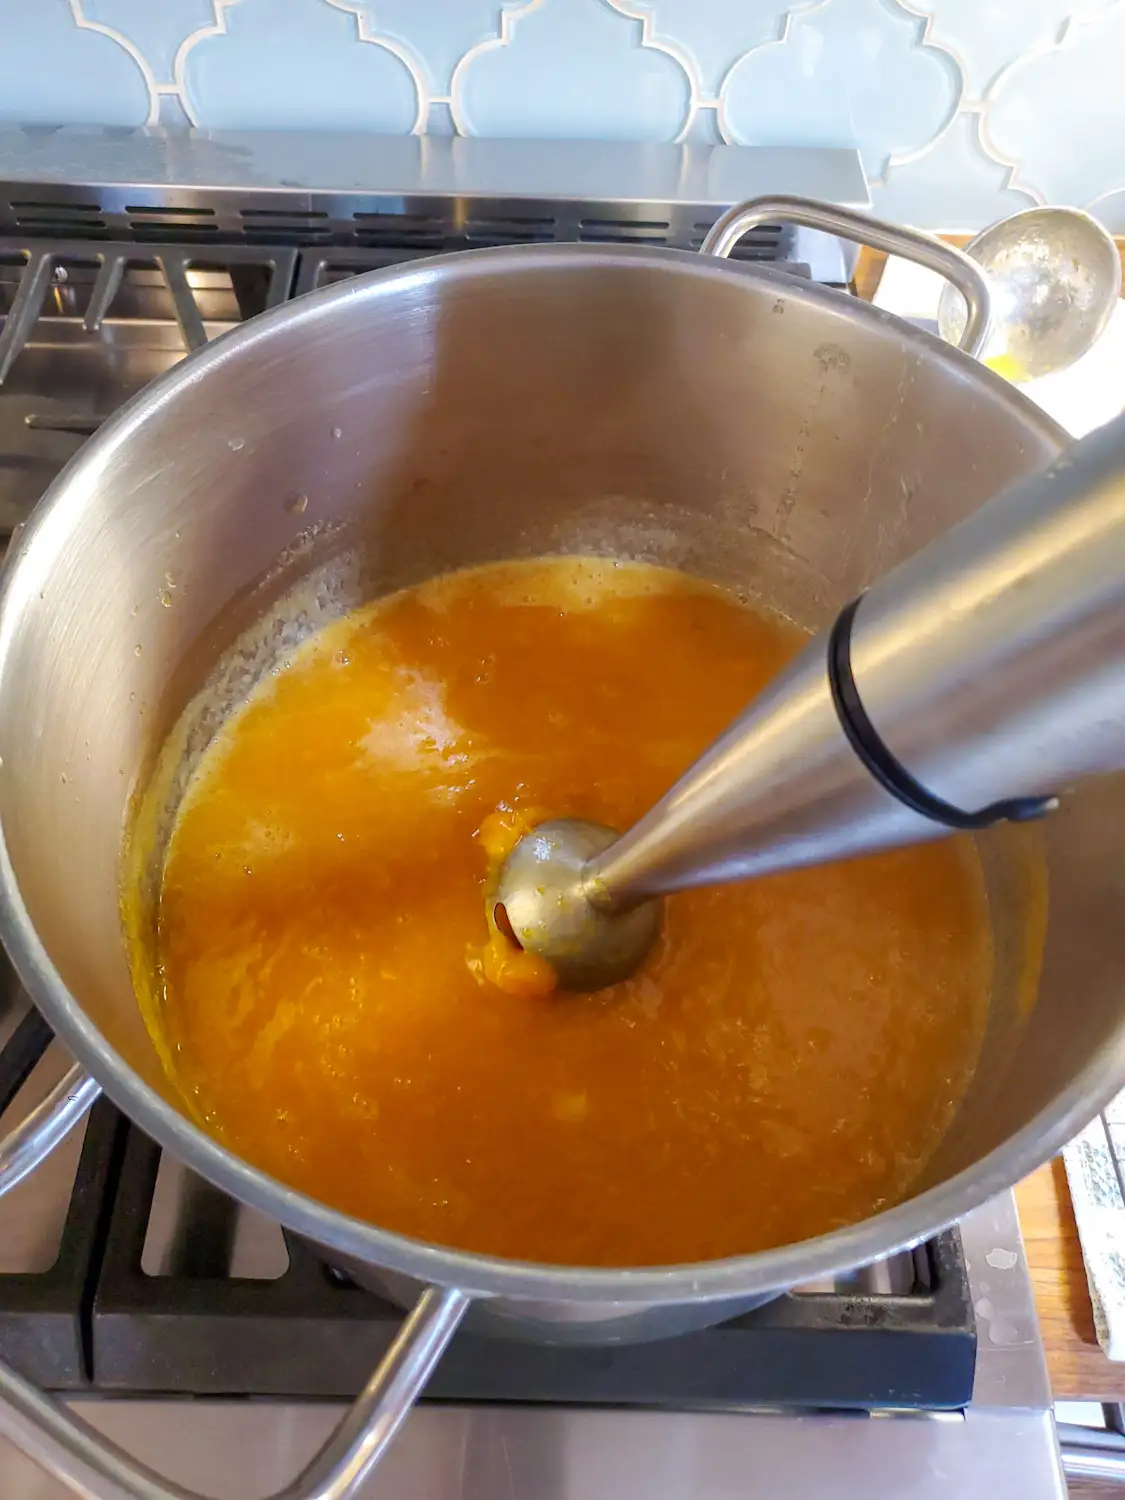 An immersion blender is being used to blend the peach mixture in a stock pot on the stove. 